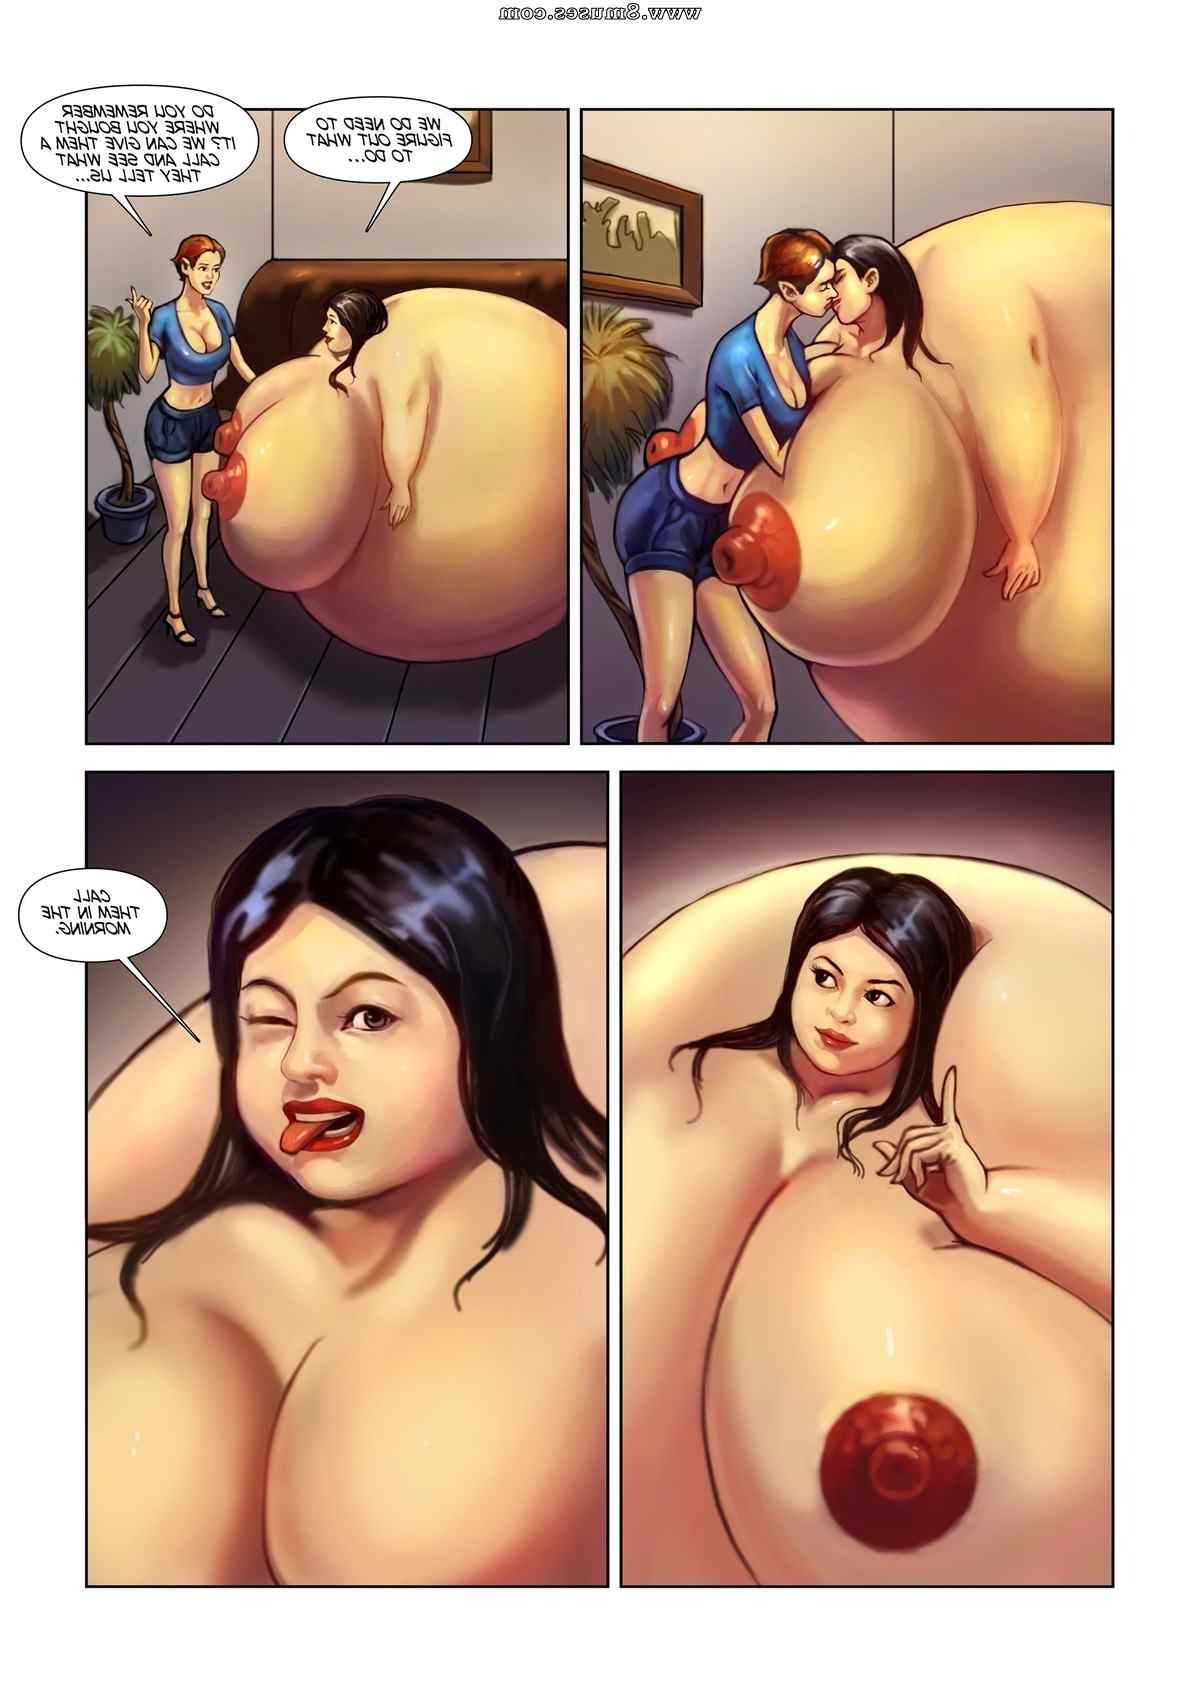 Expansionfan-Comics/Lins-Rounding Lins_Rounding__8muses_-_Sex_and_Porn_Comics_17.jpg